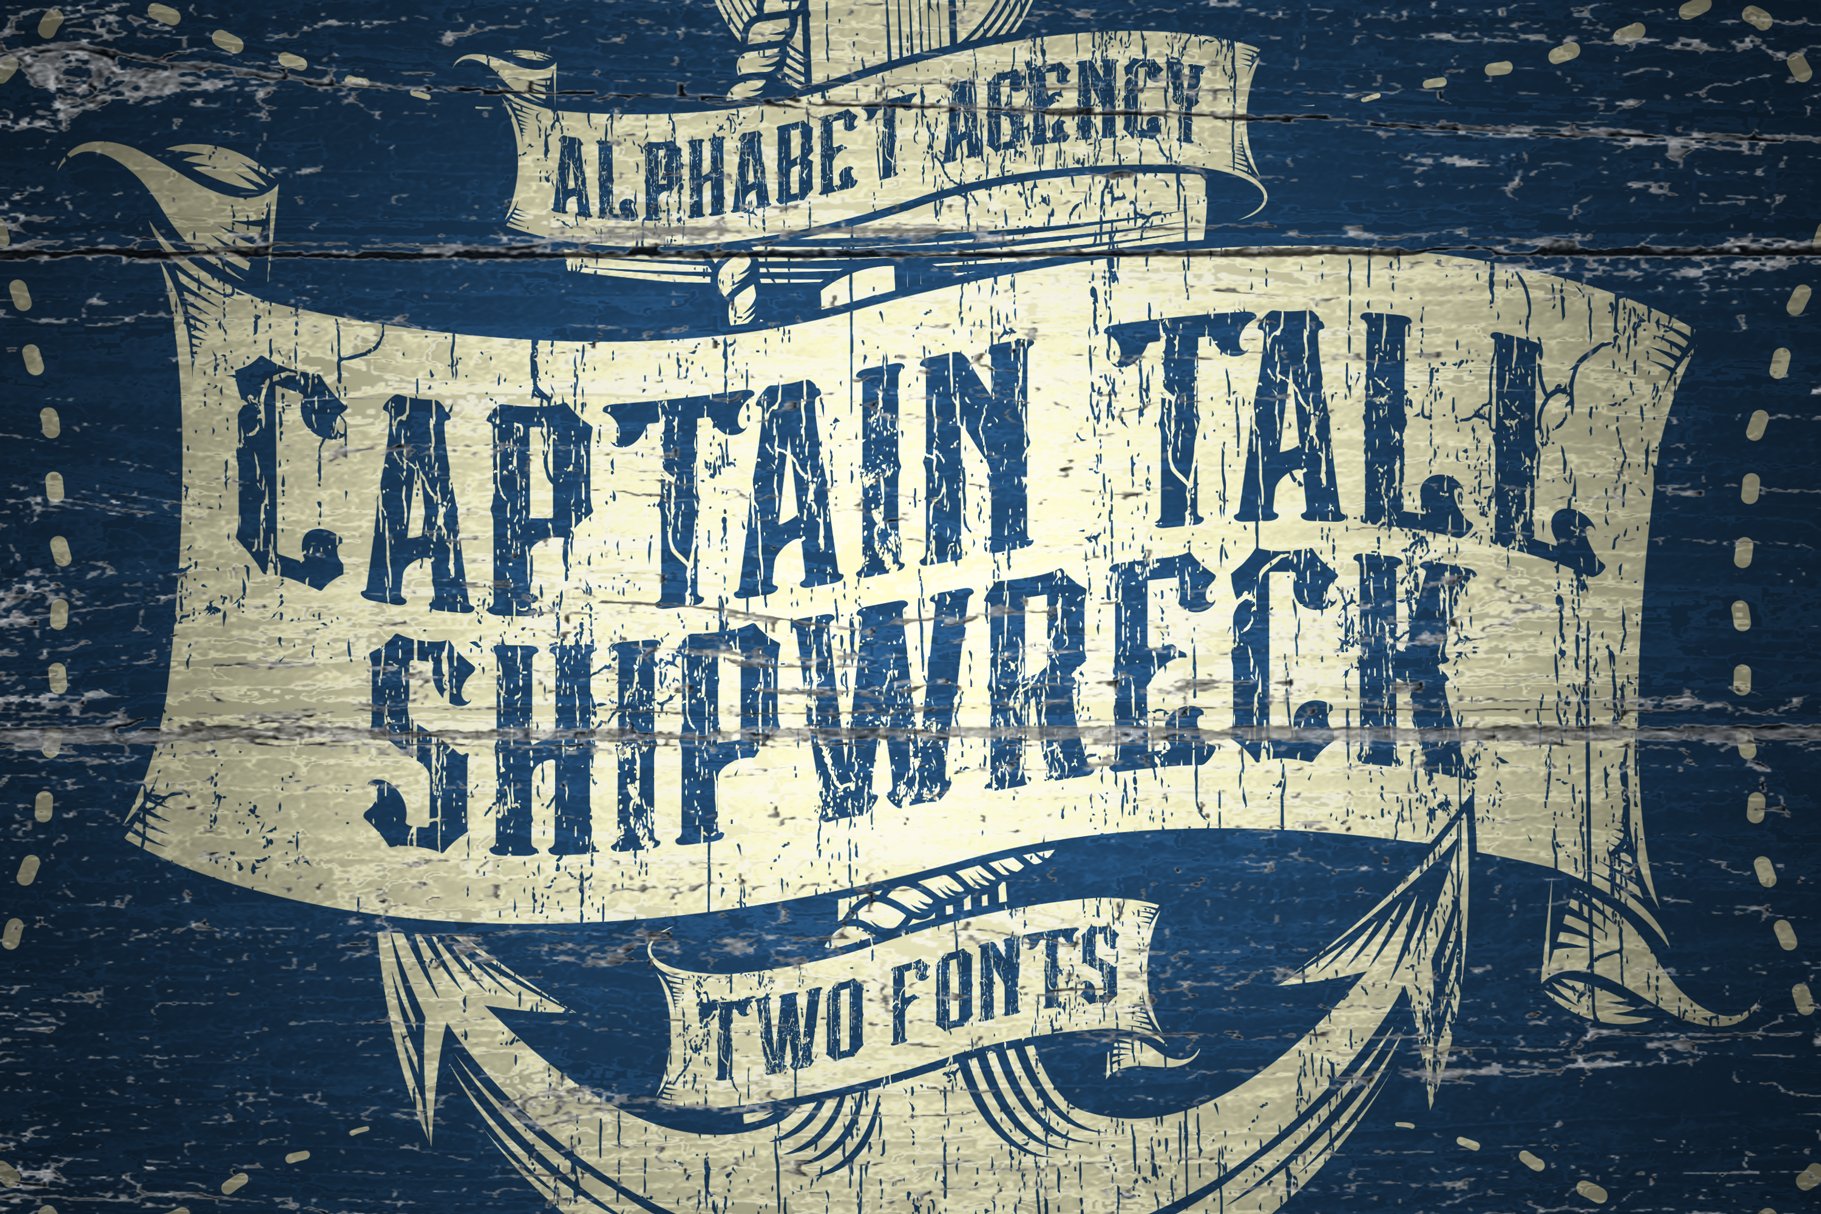 CAPTAIN TALL SHIPWRECK FONT DUO cover image.